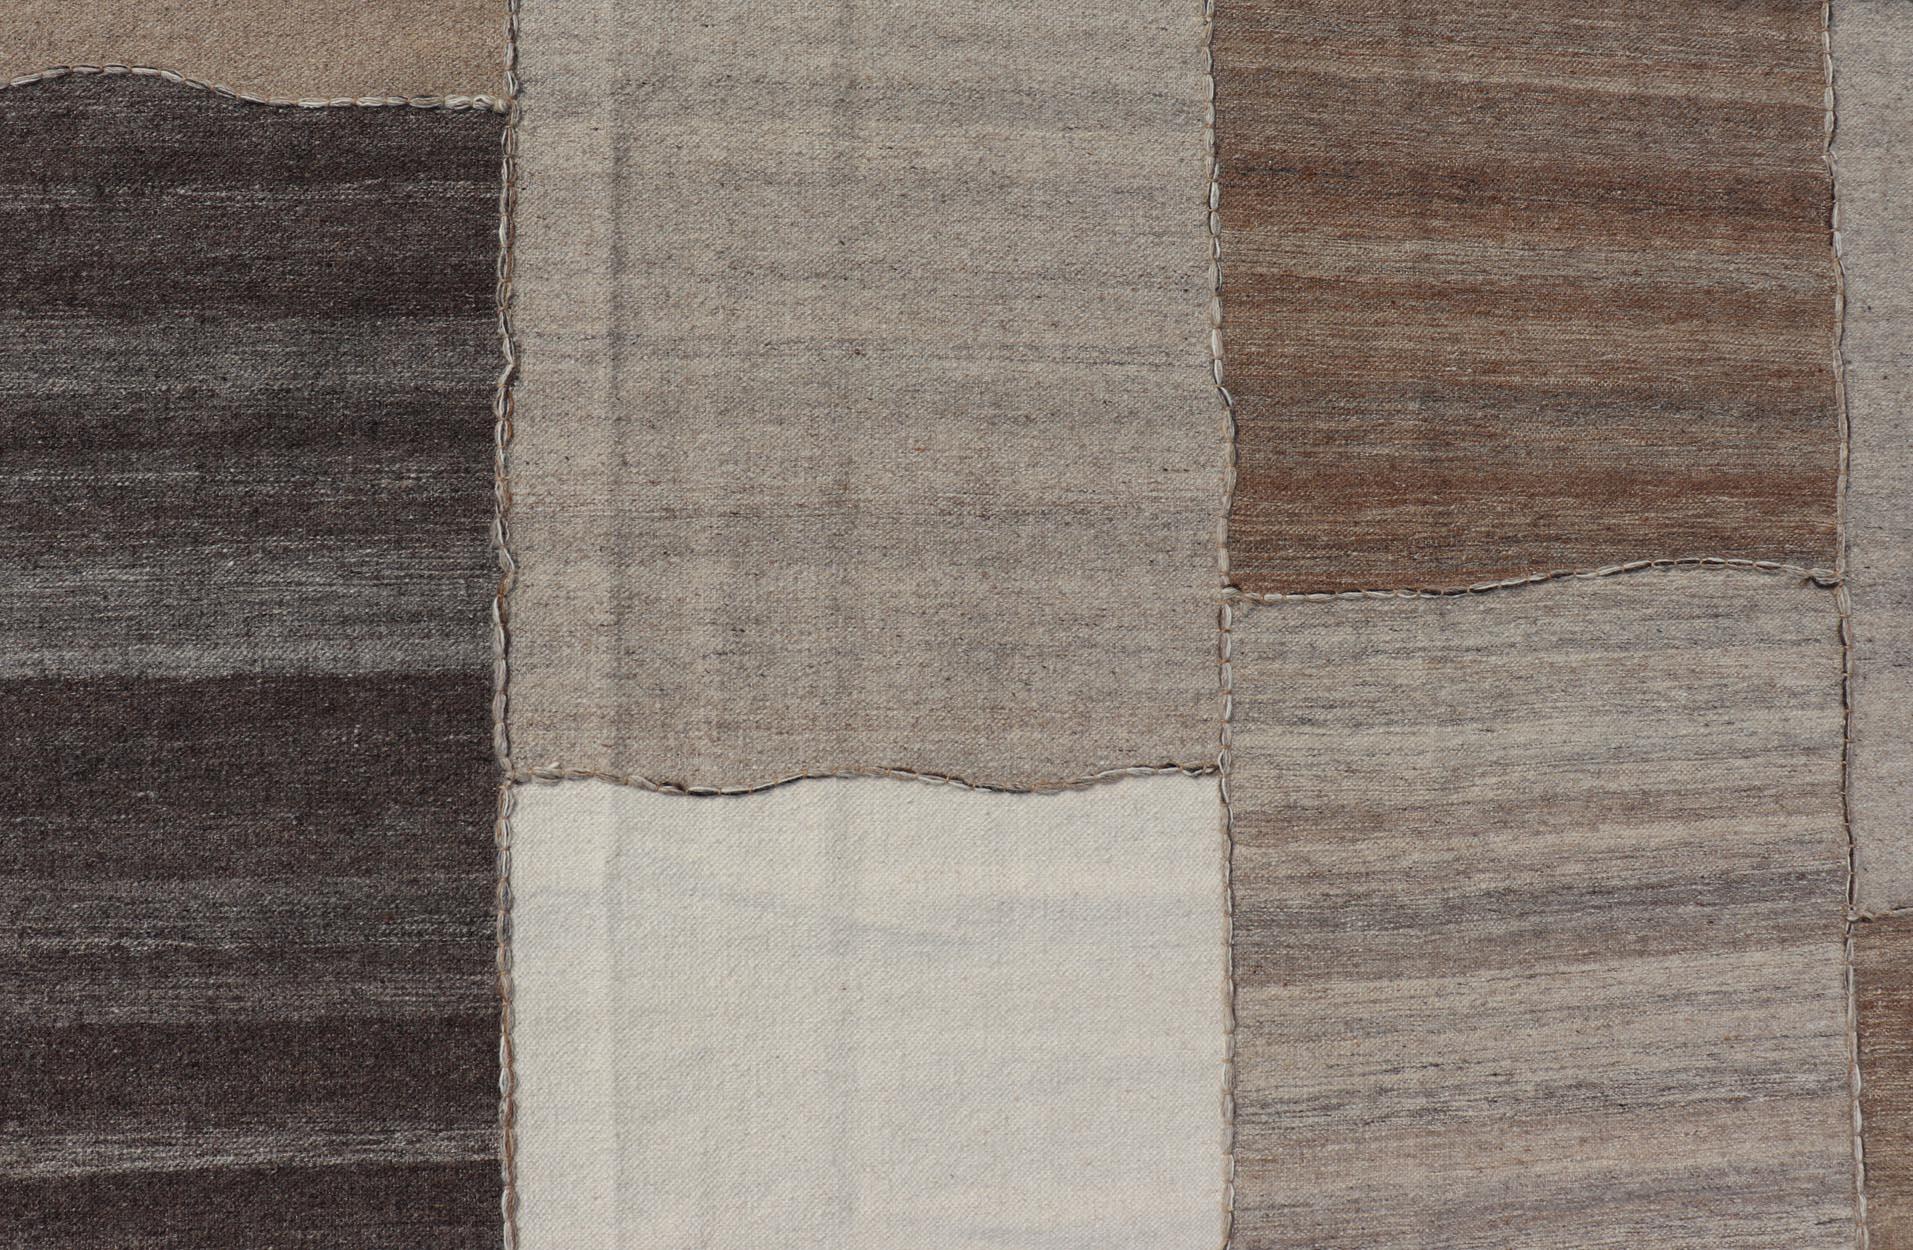 Wool Modern Kilim Rug in Multi-Panel Striped Design with Brown, Gray, White and Taupe For Sale